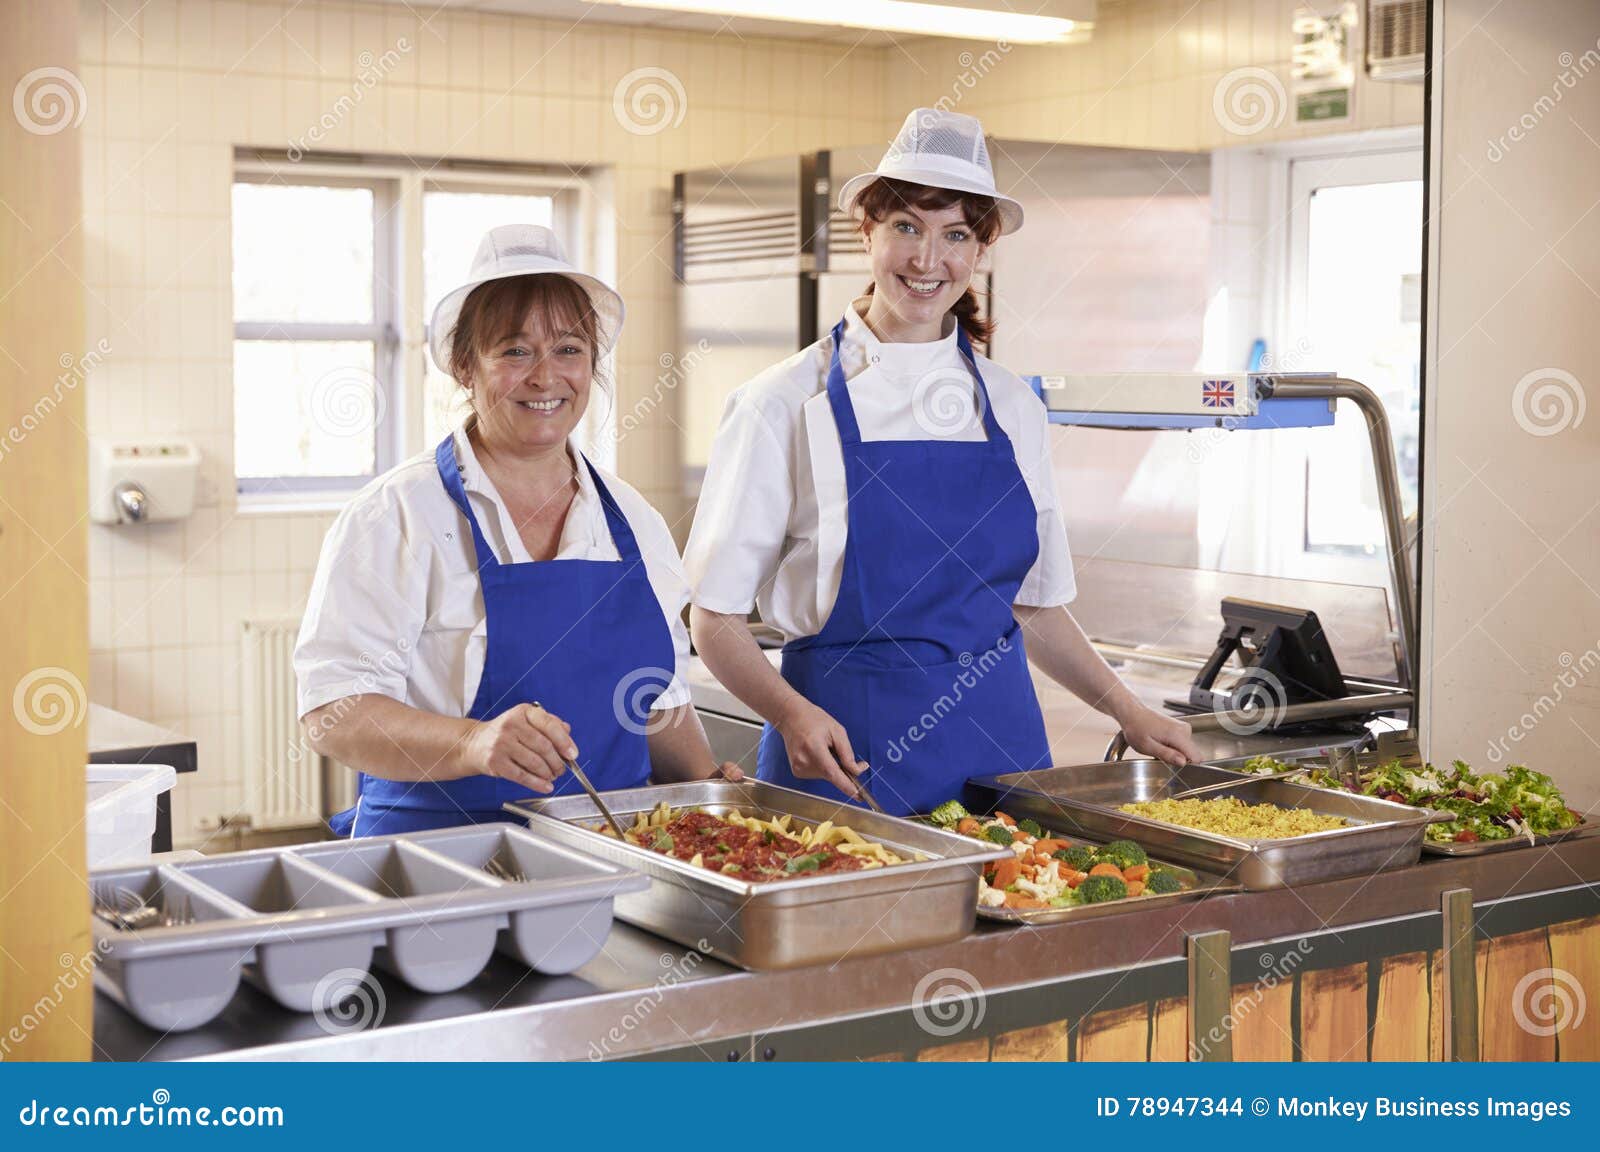 two women waiting to serve lunch in a school cafeteria